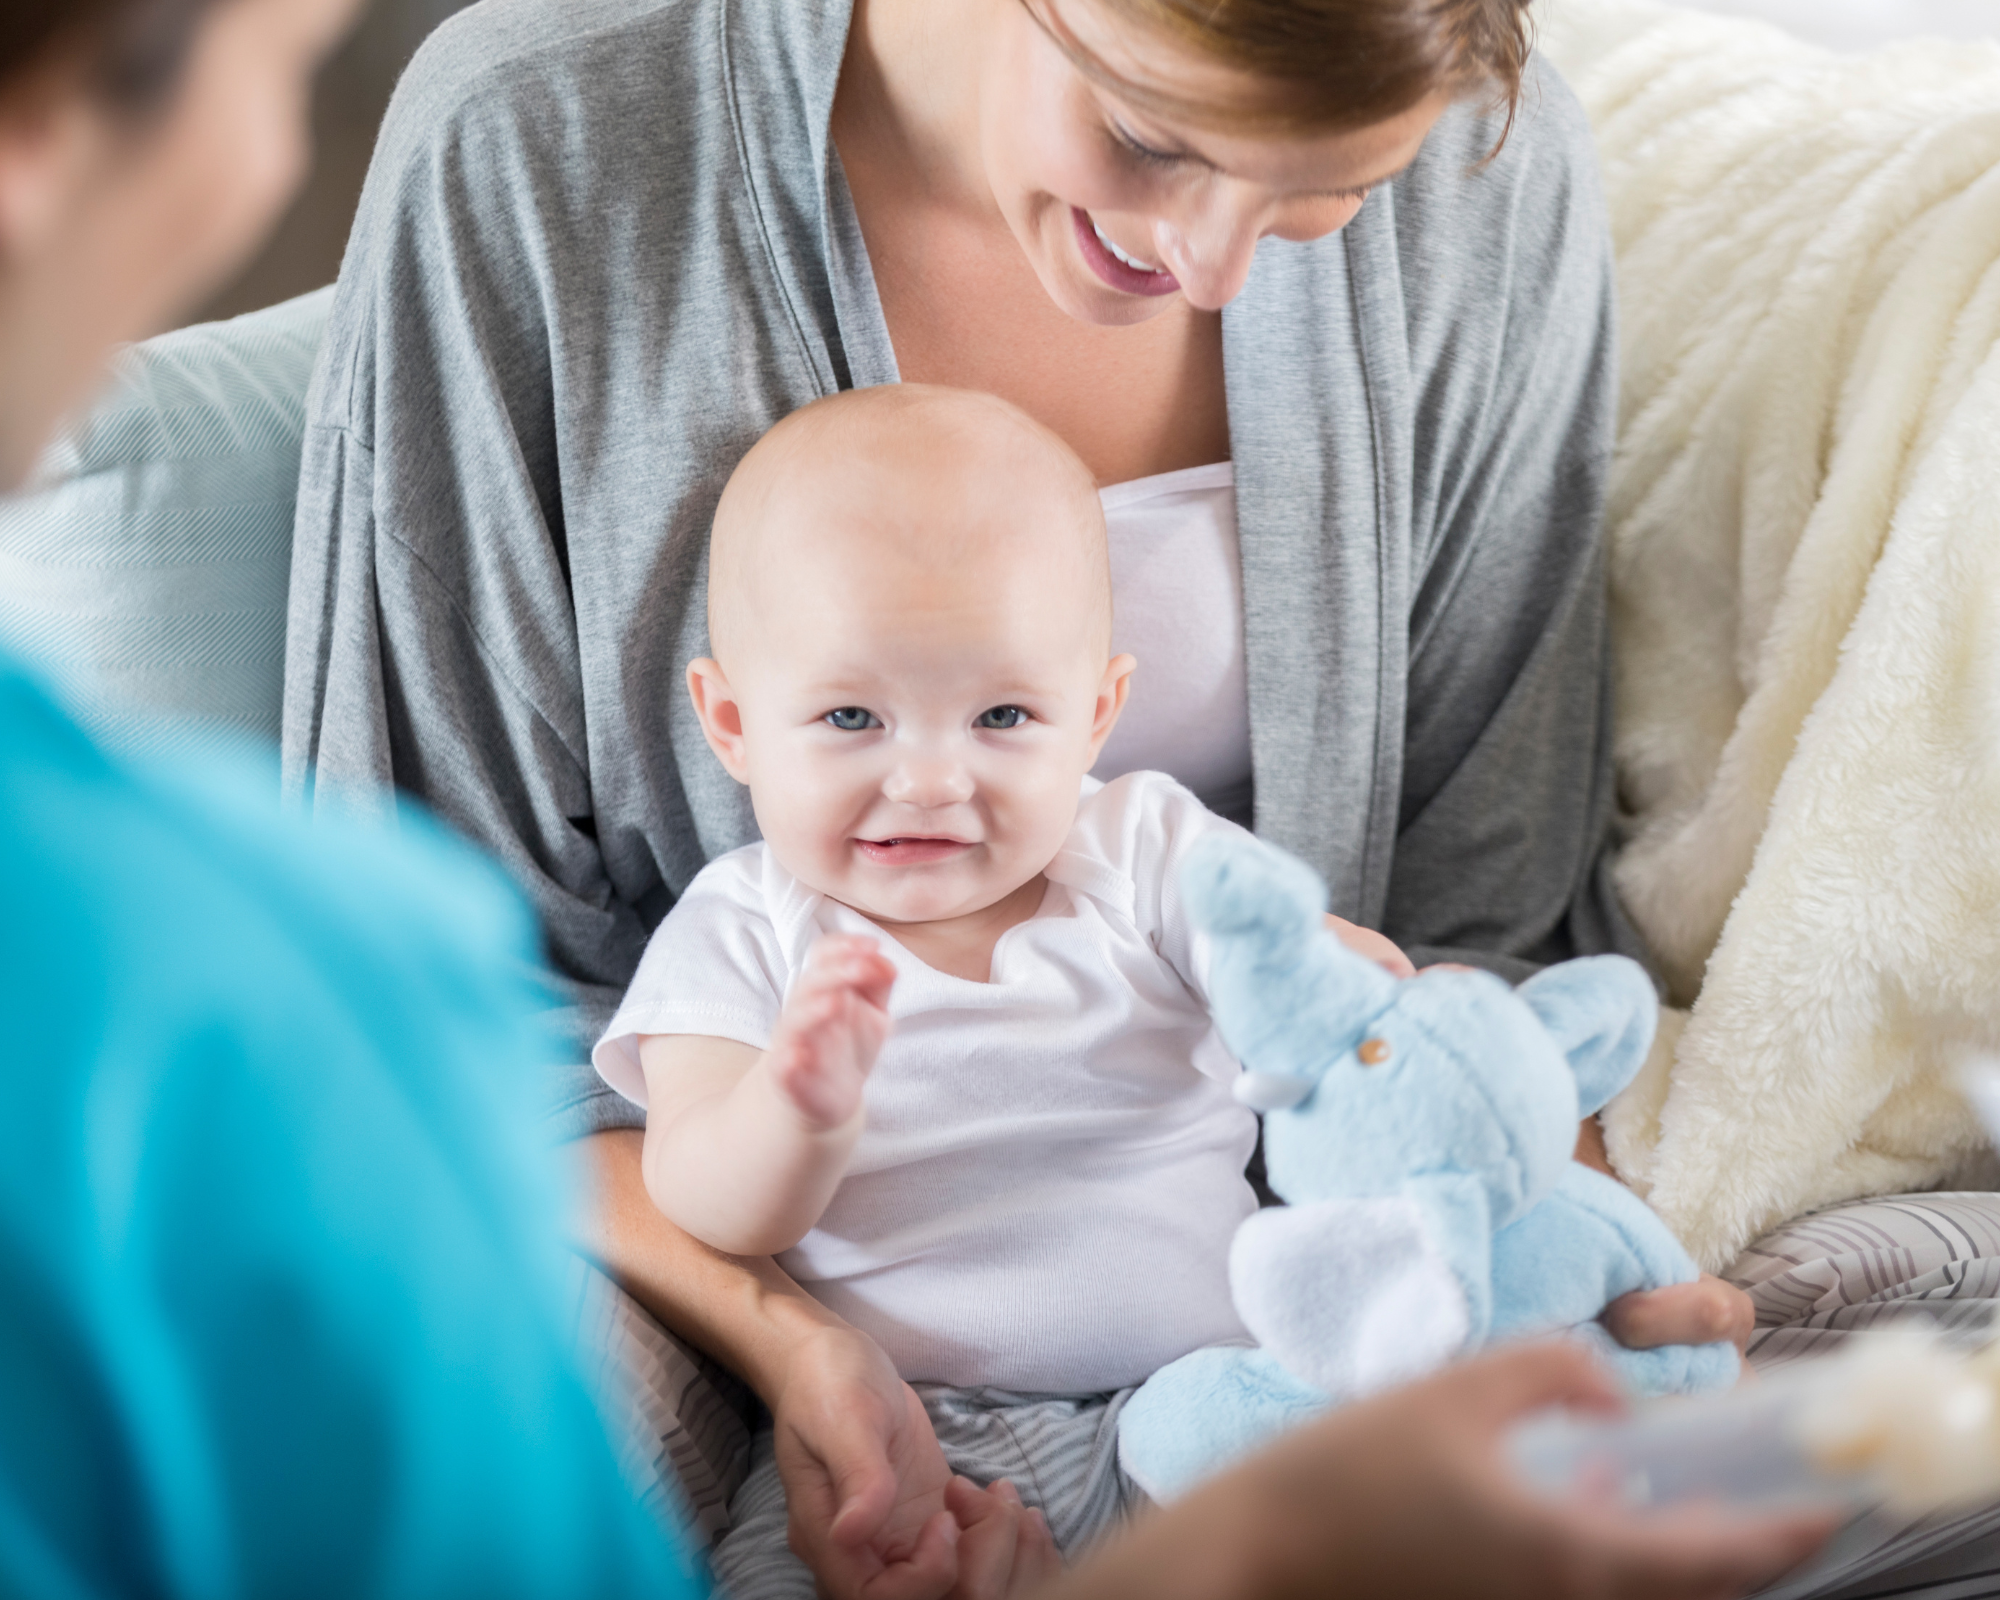 Smiling baby sitting on a mother's lap: postpartum doula demand